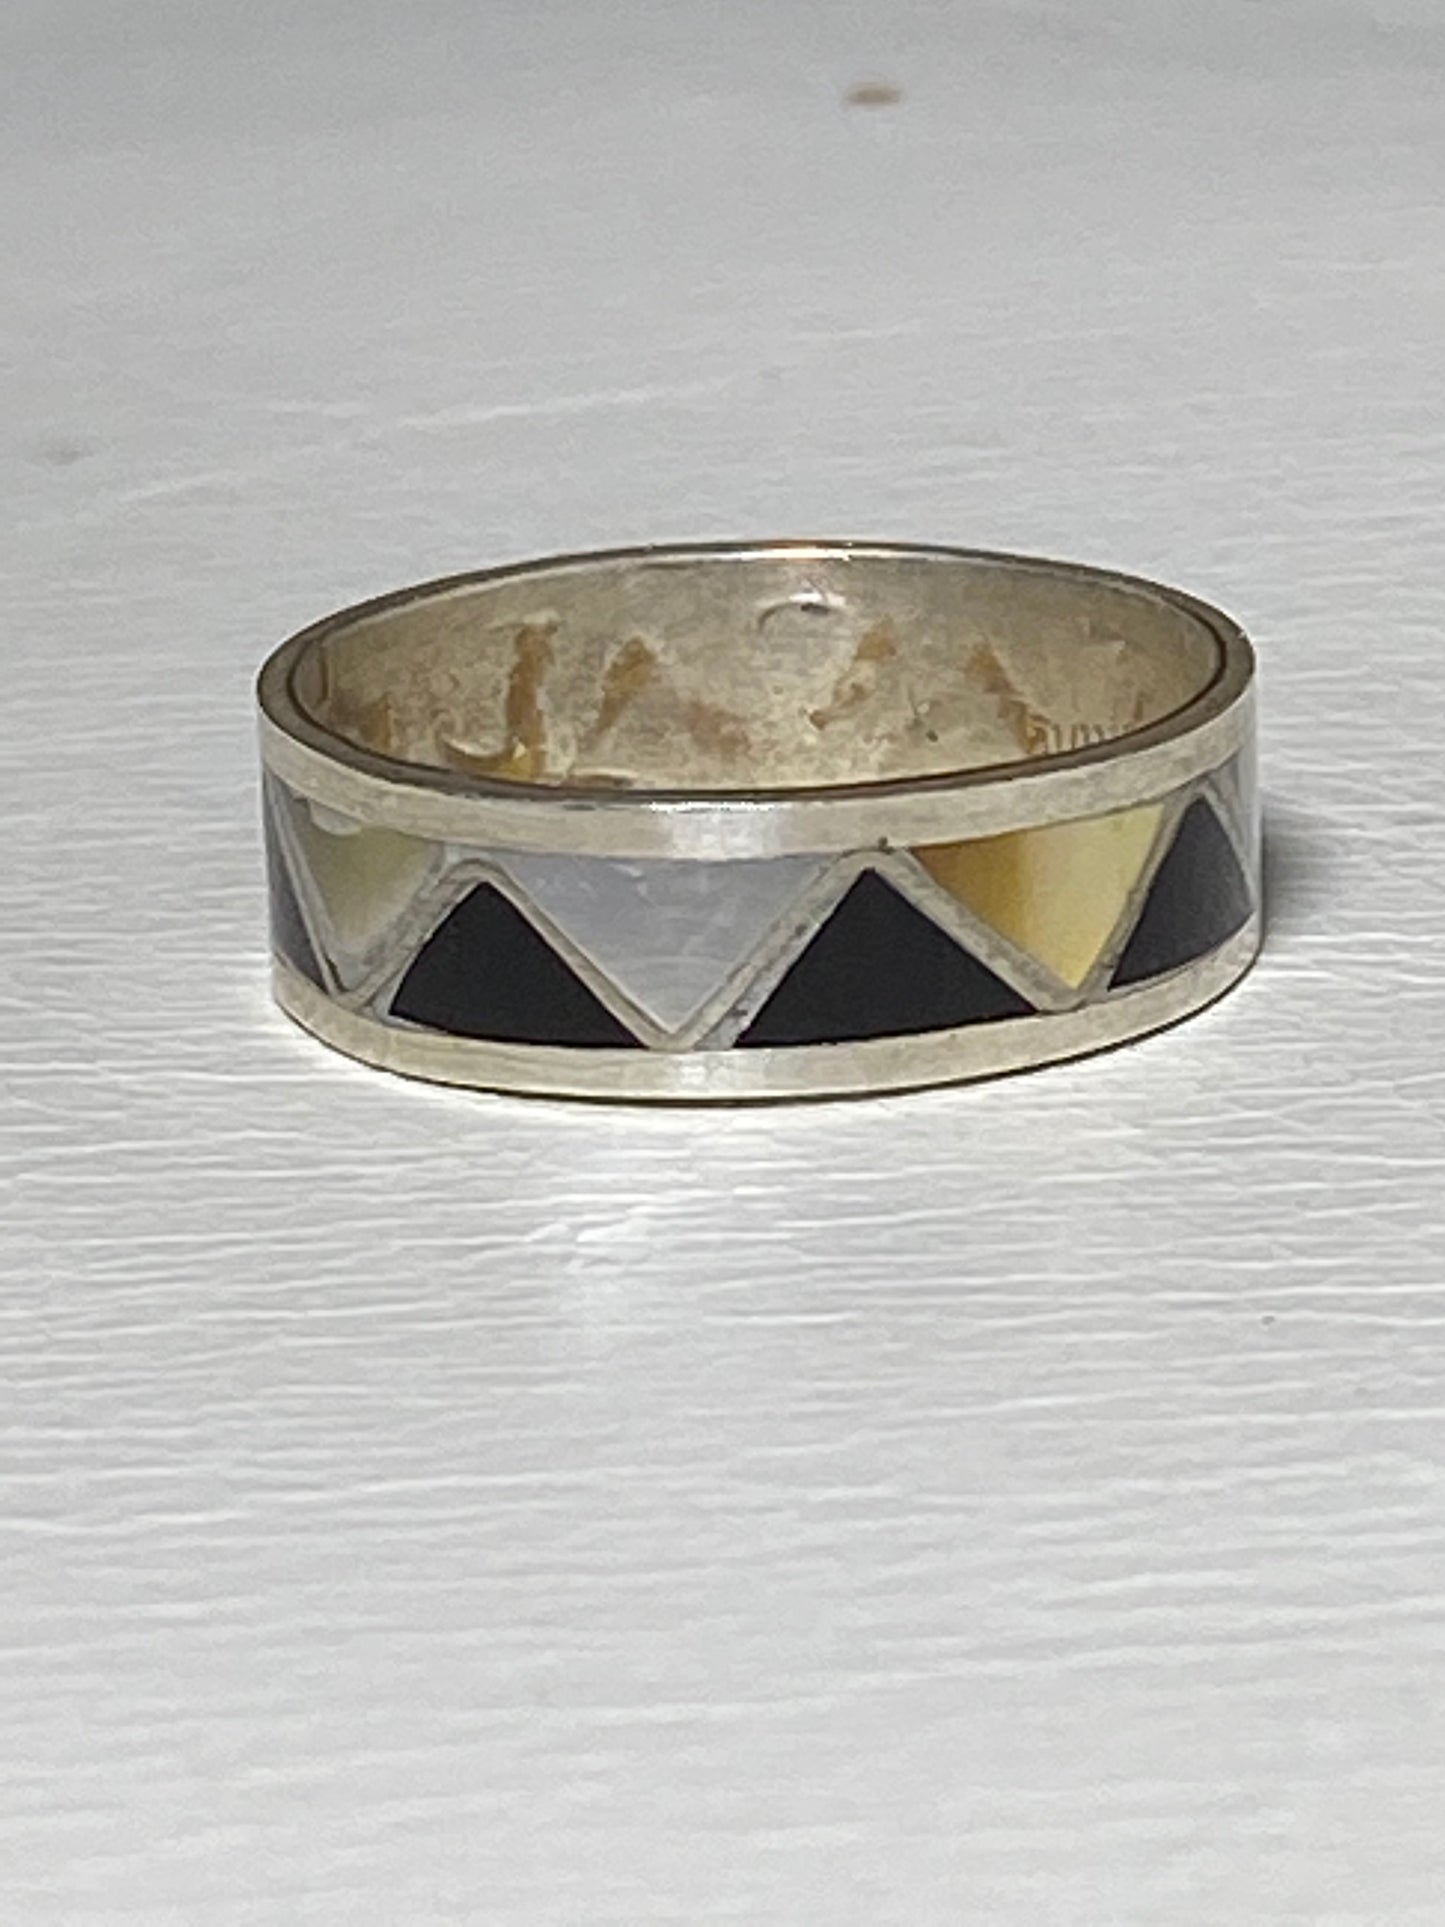 Onyx ring MOP mother of pearl southwest band sterling silver band women girls